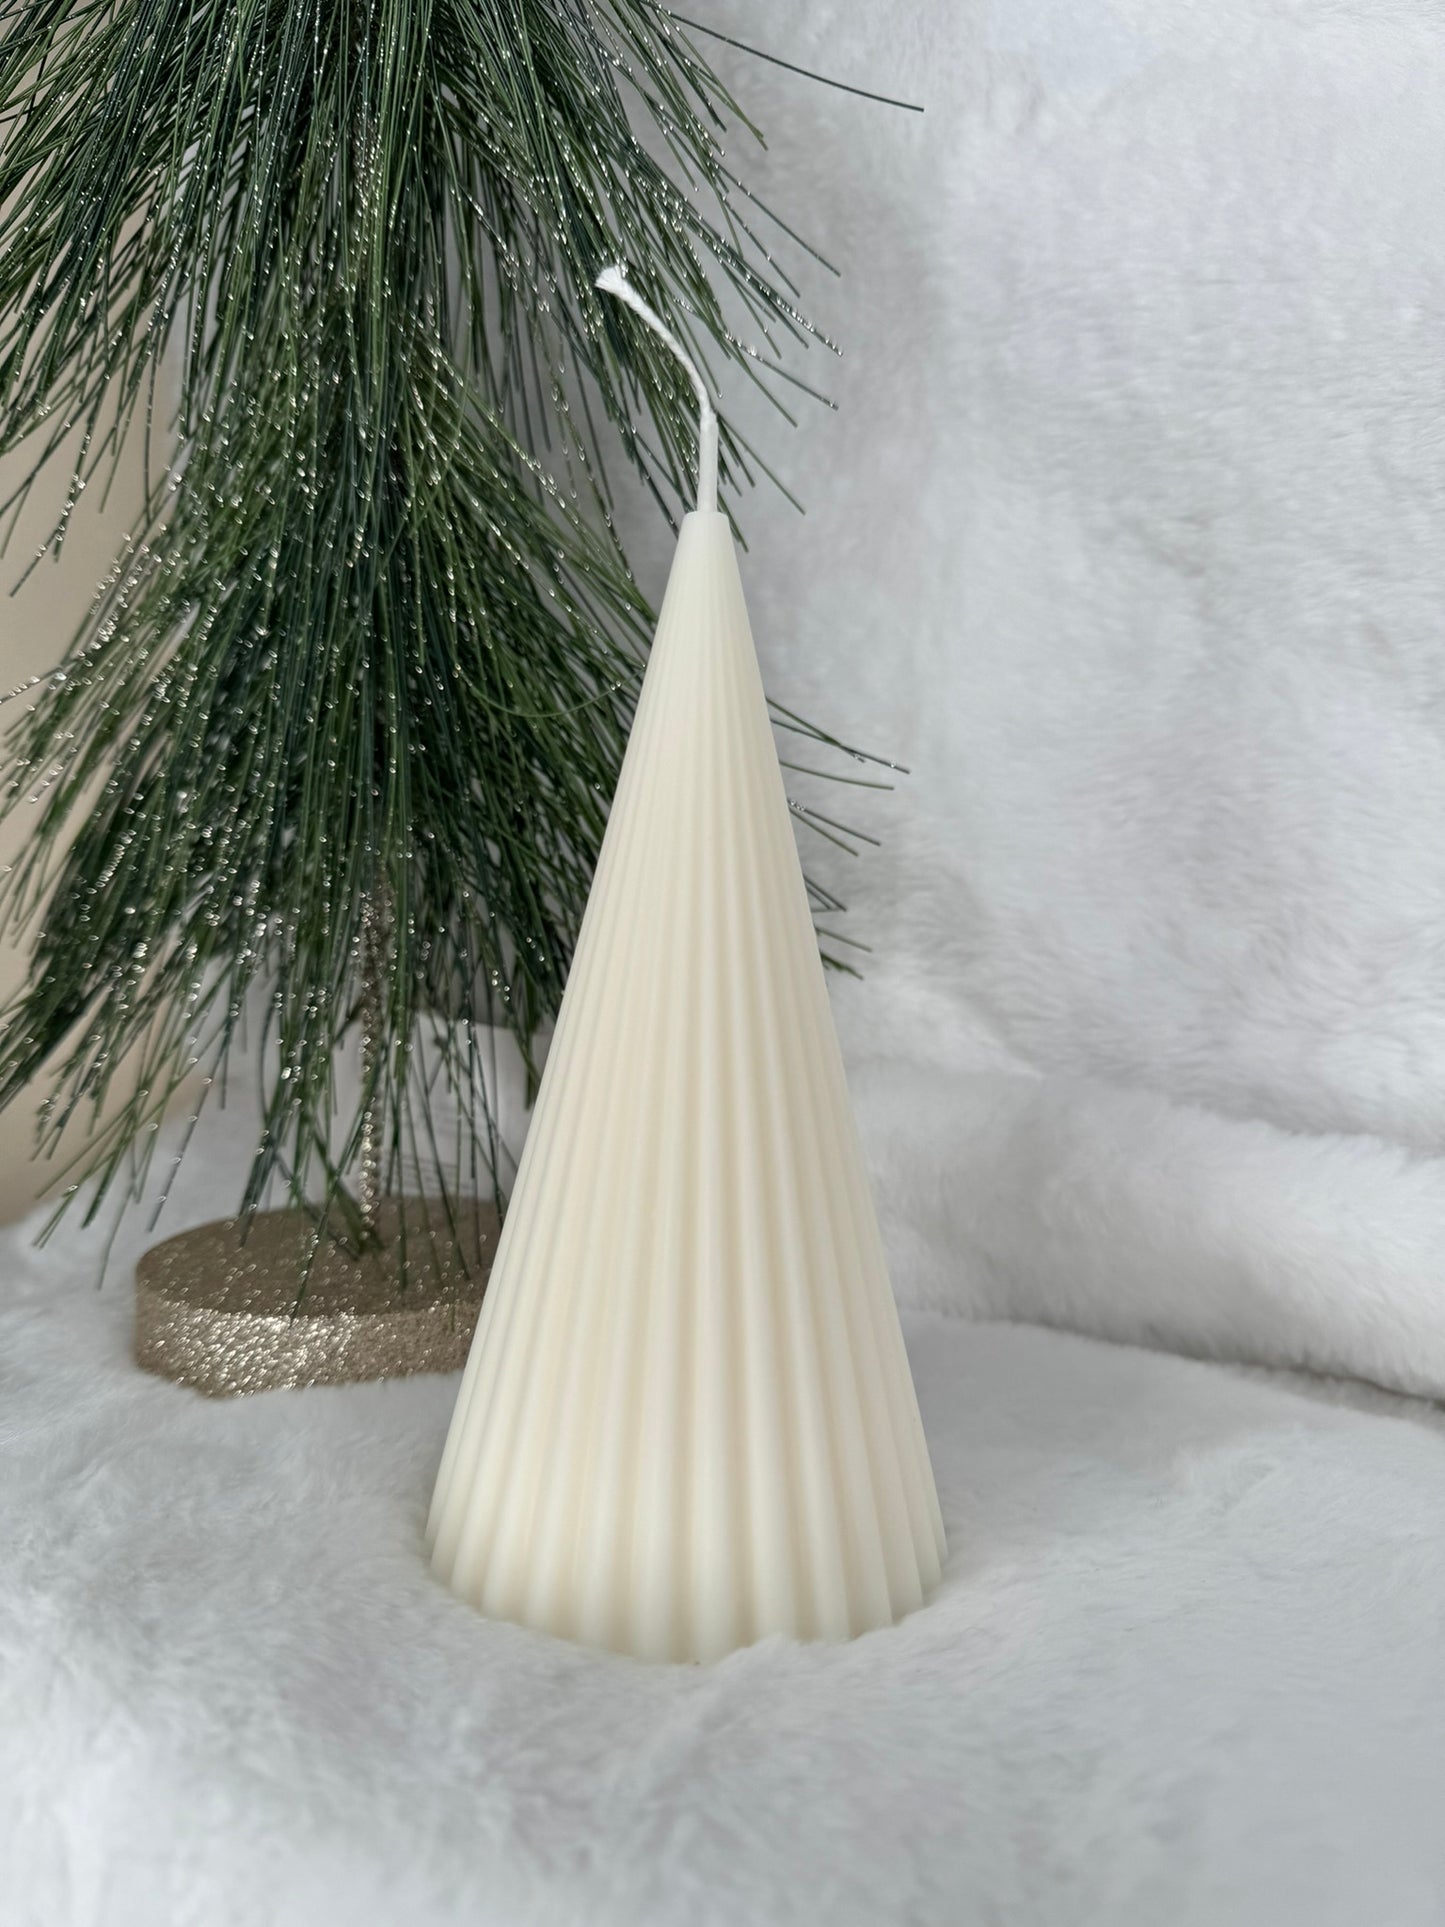 Christmas Conifer Tree Candle